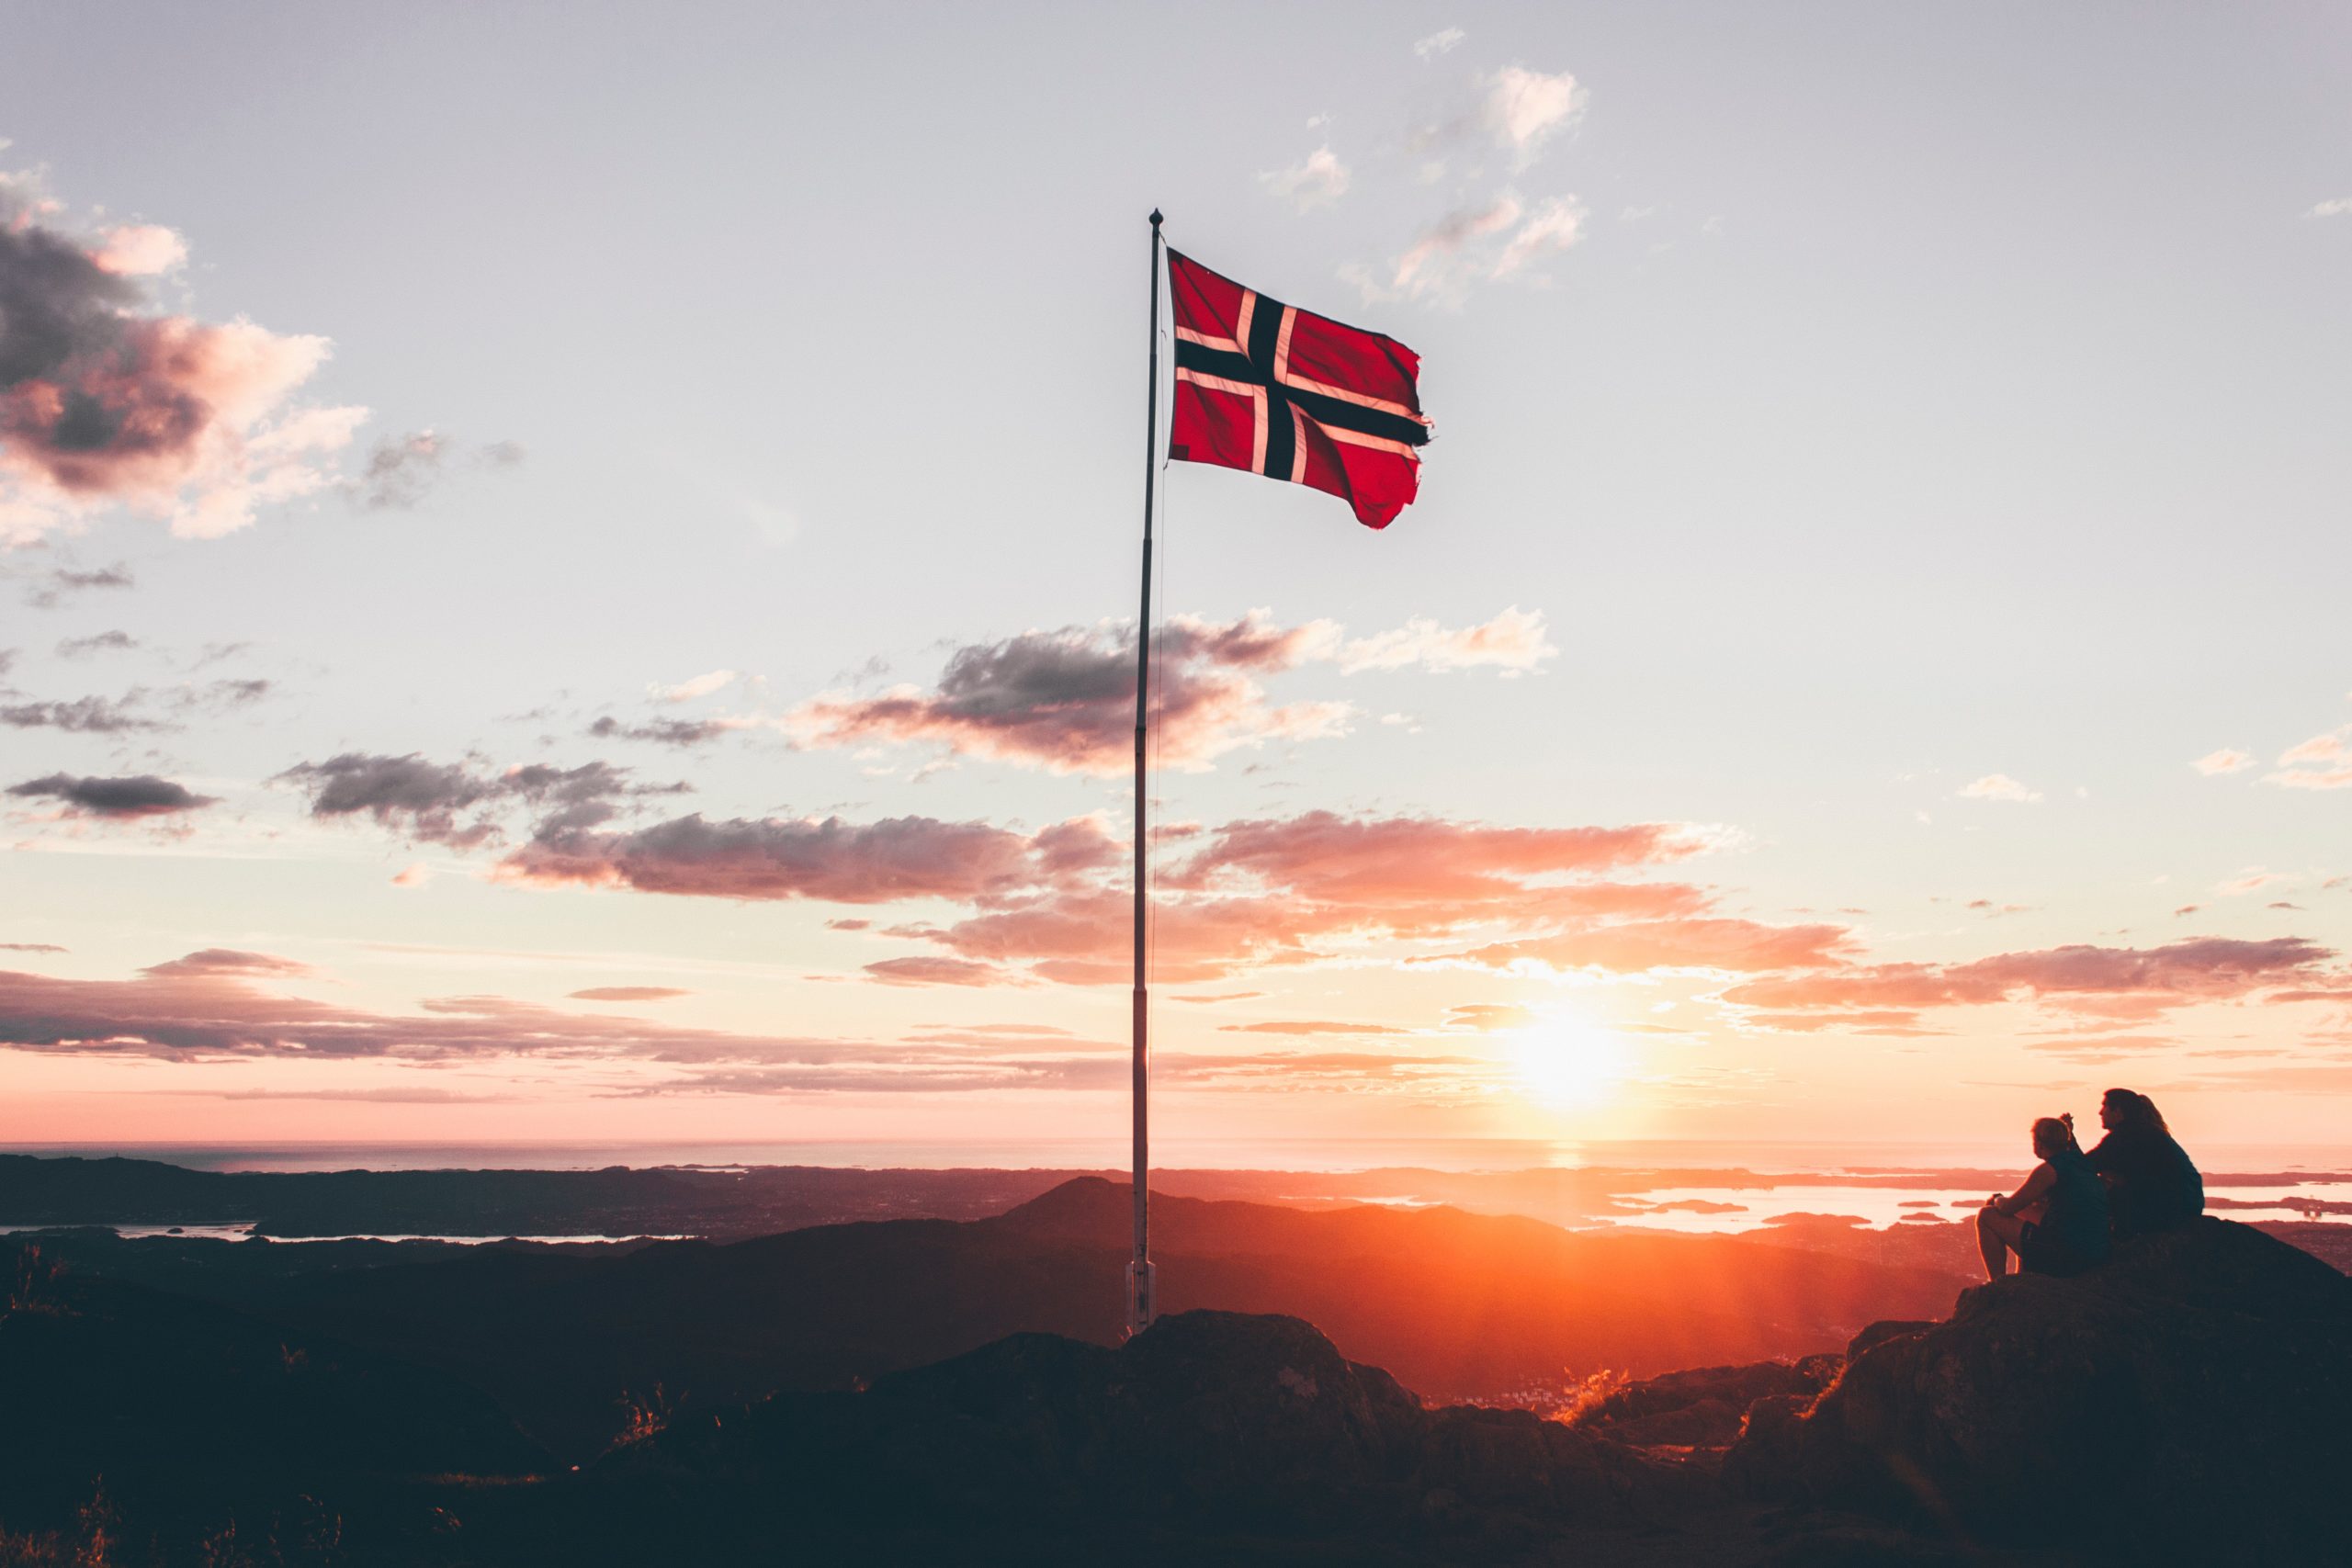 Norwegian Citizenship: How to Get one? - Immigration residency blog